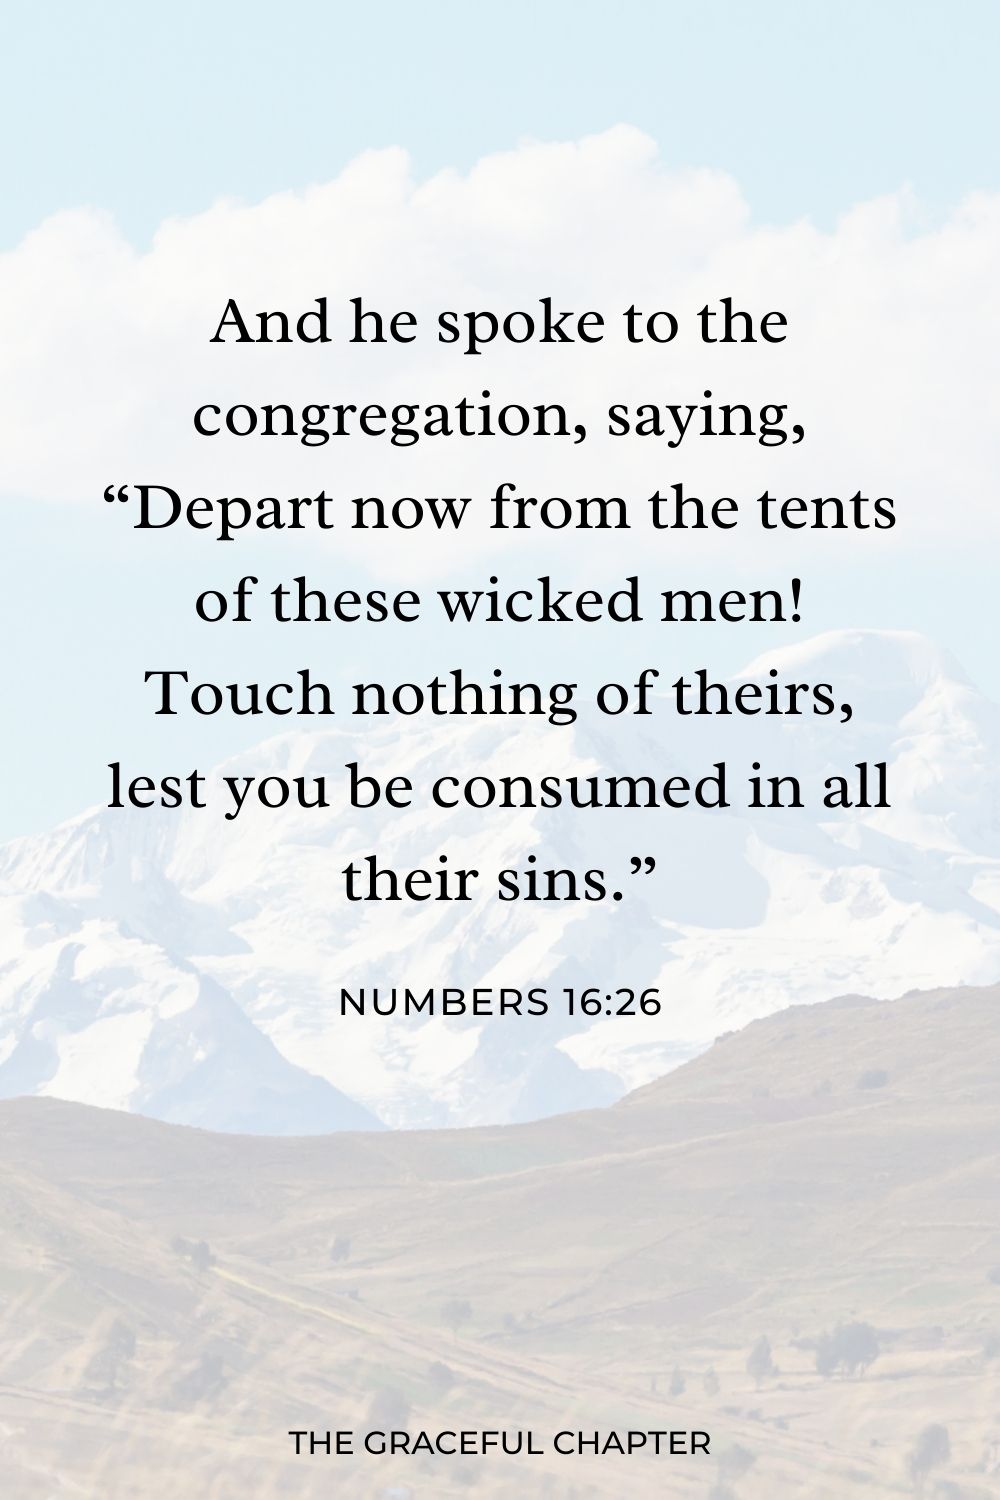  And he spoke to the congregation, saying, “Depart now from the tents of these wicked men! Touch nothing of theirs, lest you be consumed in all their sins.” Numbers 16:26